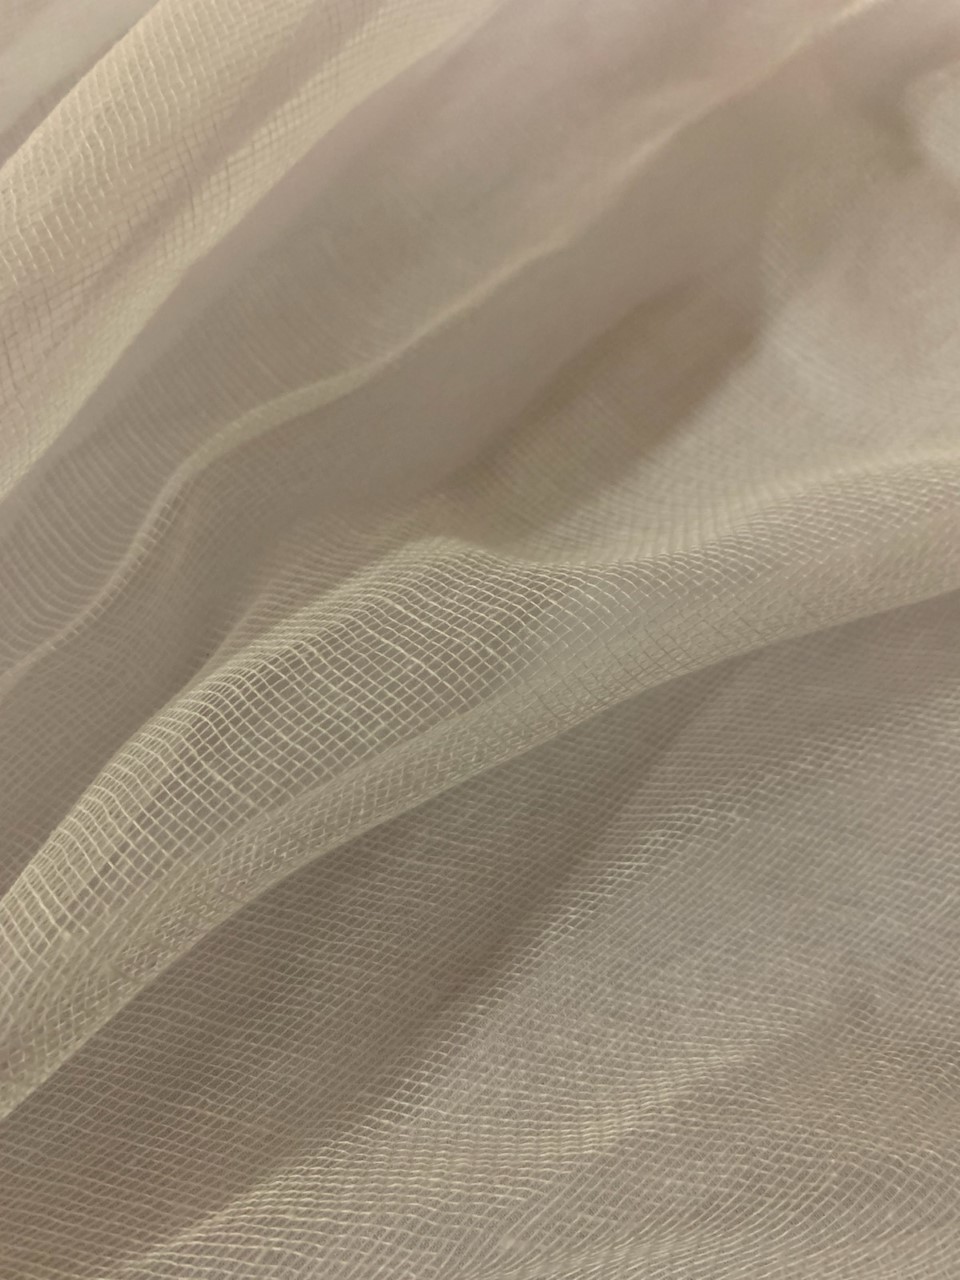 36" White Grade 40 Cheesecloth By The Yard - Click Image to Close